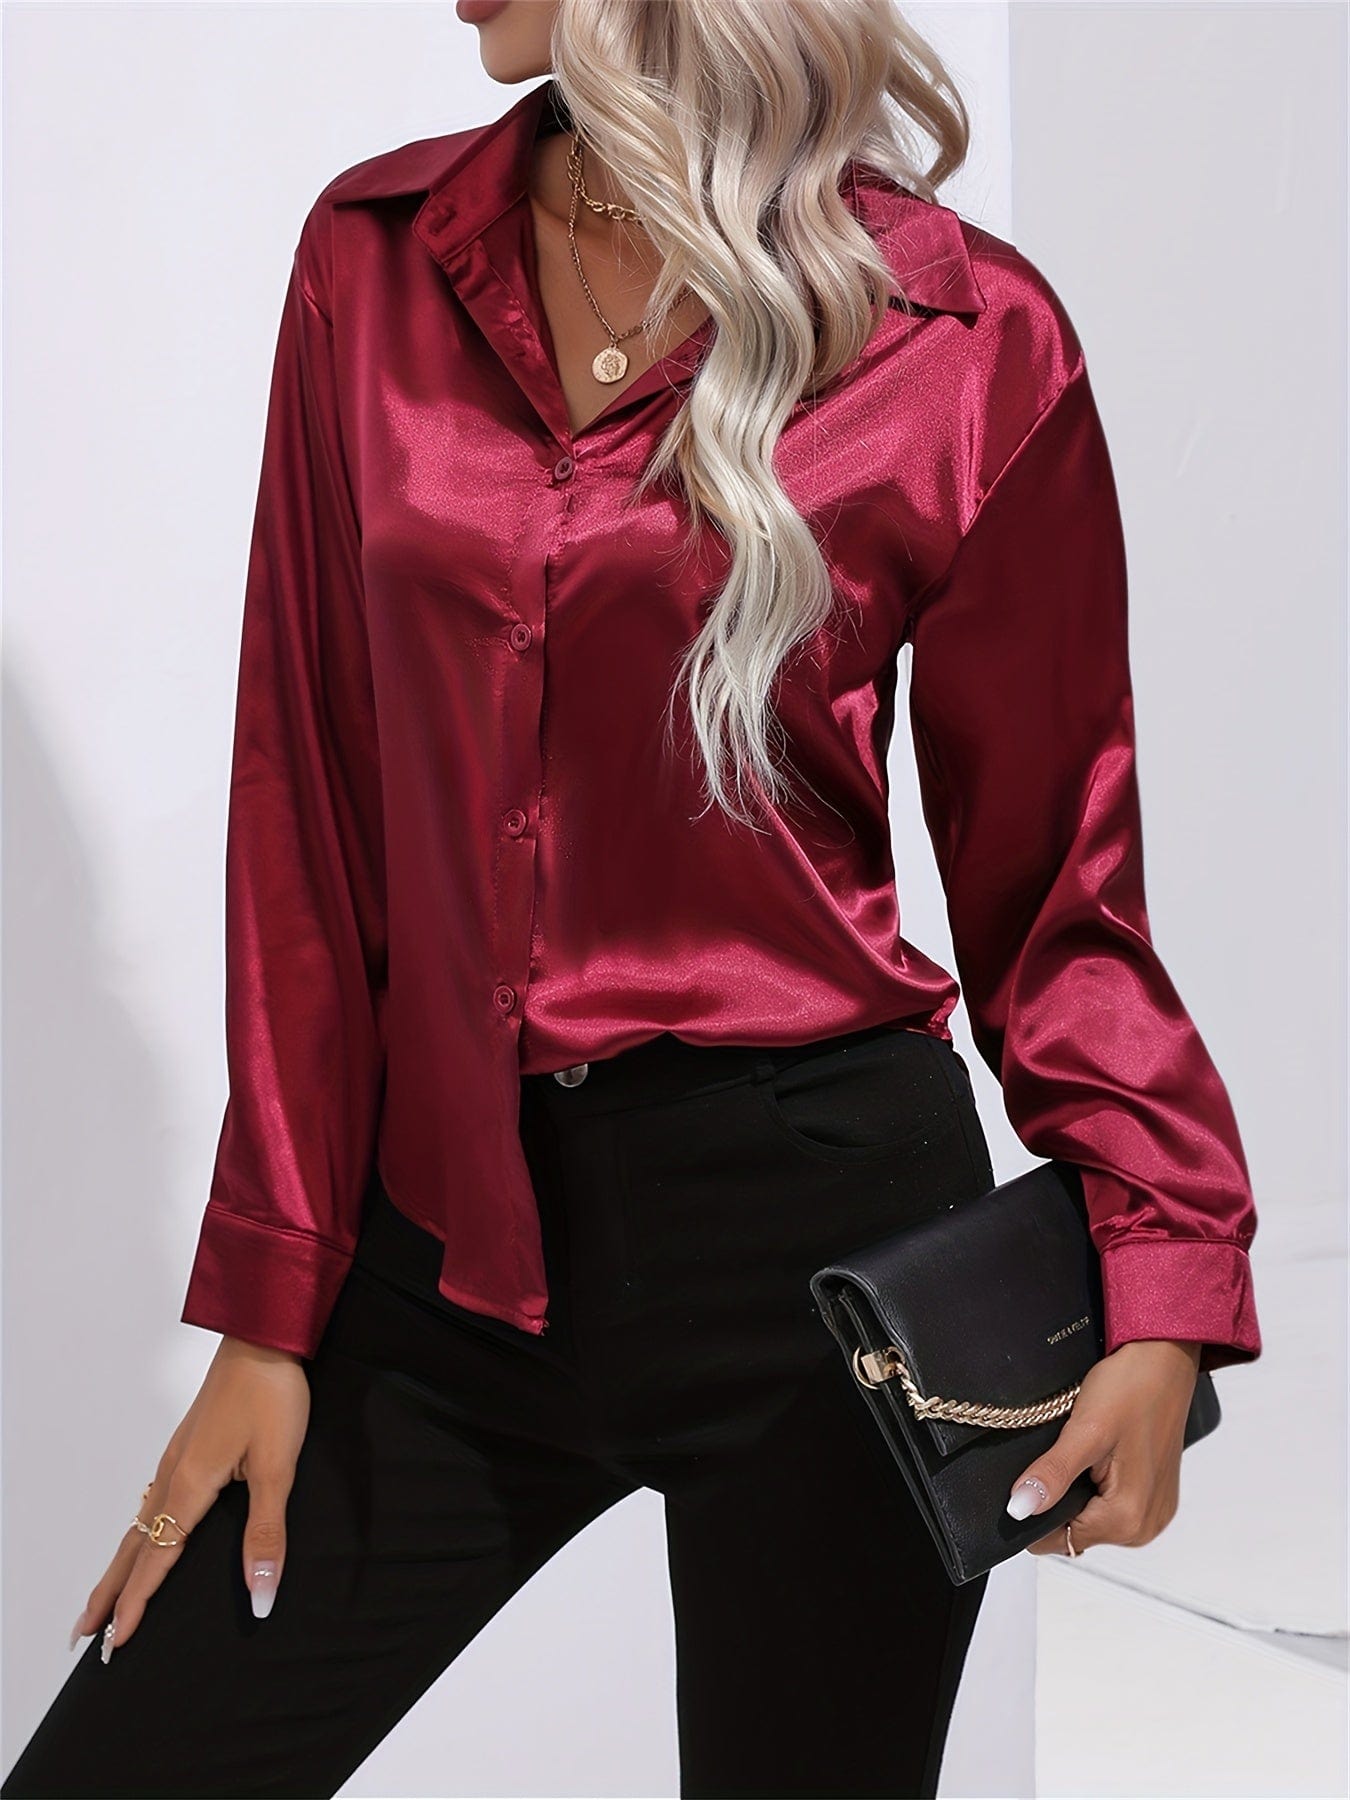 Solid Elegant Smoothly Button Front Long Sleeve Blouse